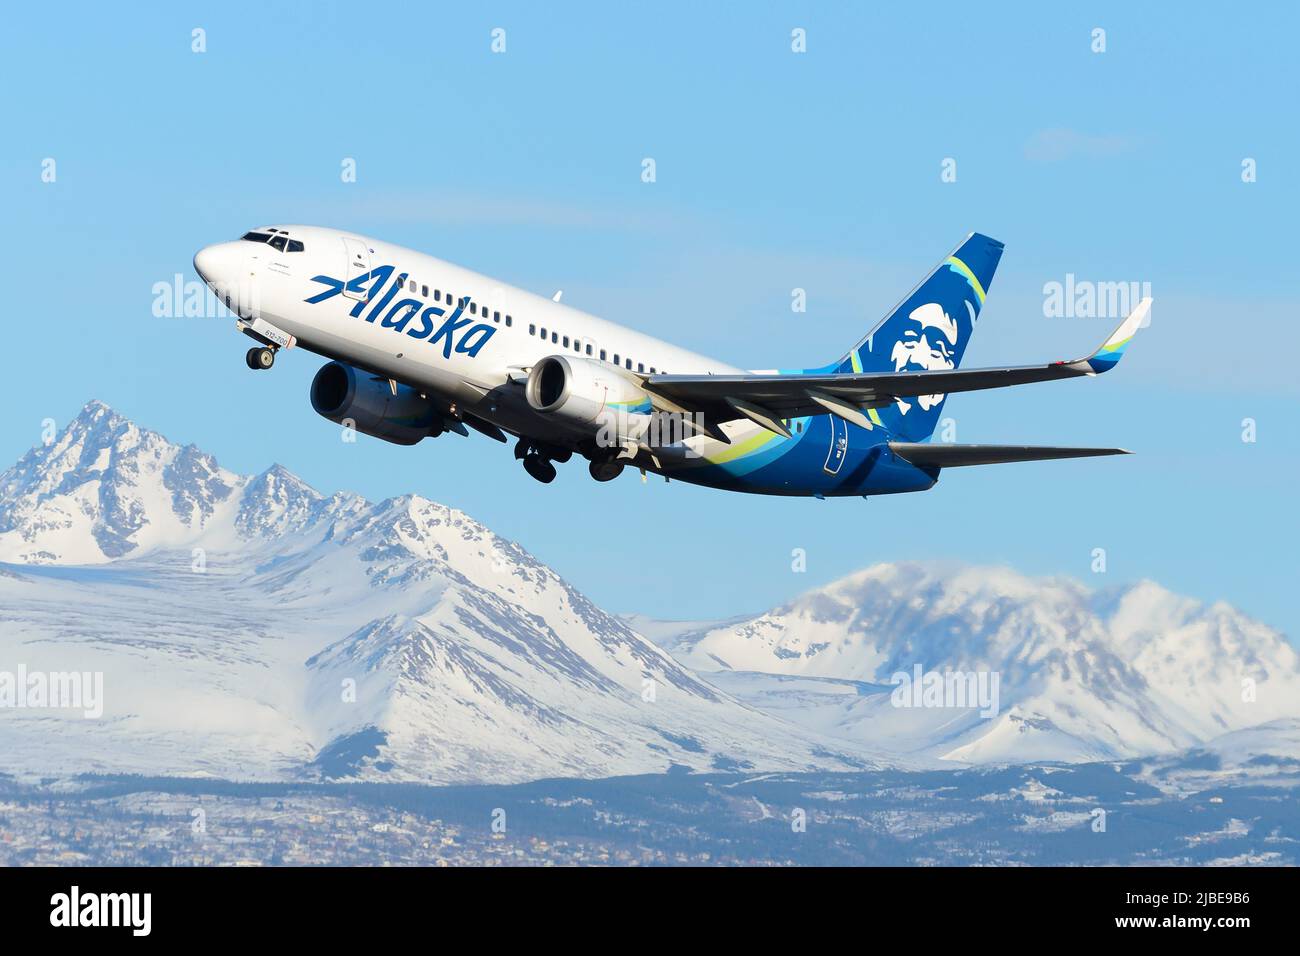 Alaska Airlines Boeing 737 taking off from Anchorage, Alaska. Alaska Airlines 737-700 airplane departure with snow covered mountains behind. N612AS. Stock Photo